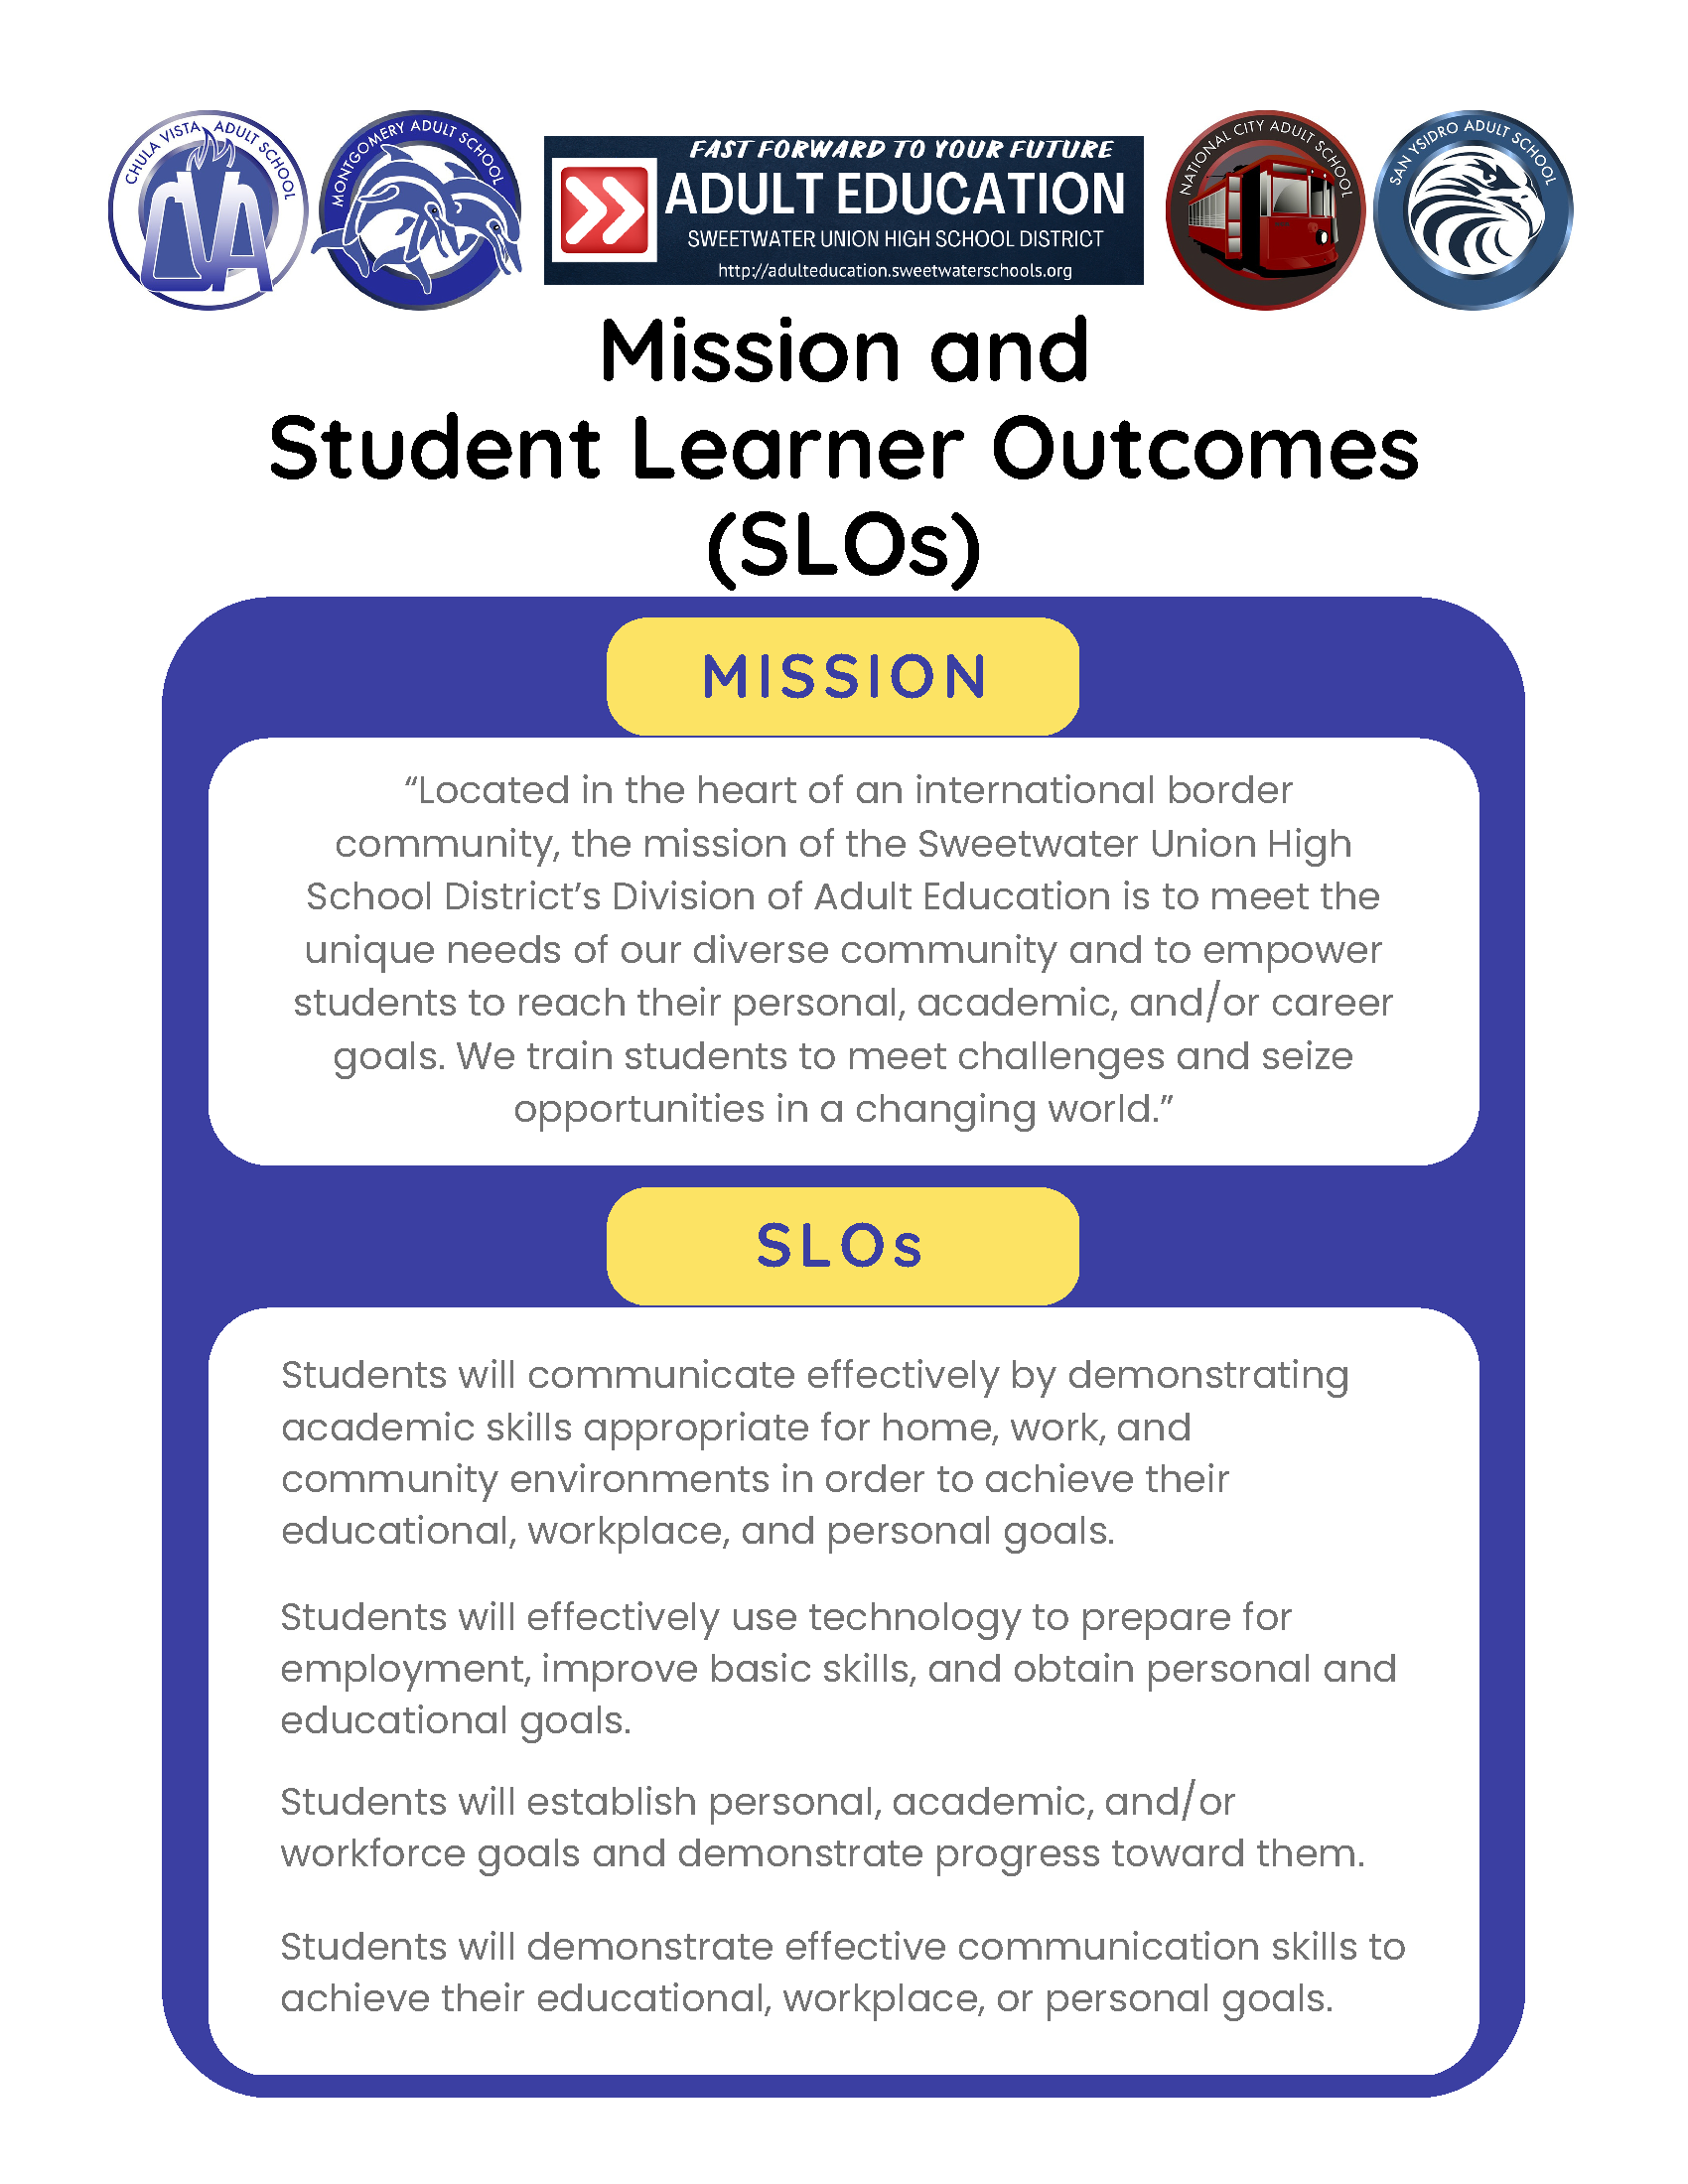 Adult education mission statement and student learner outcomes.